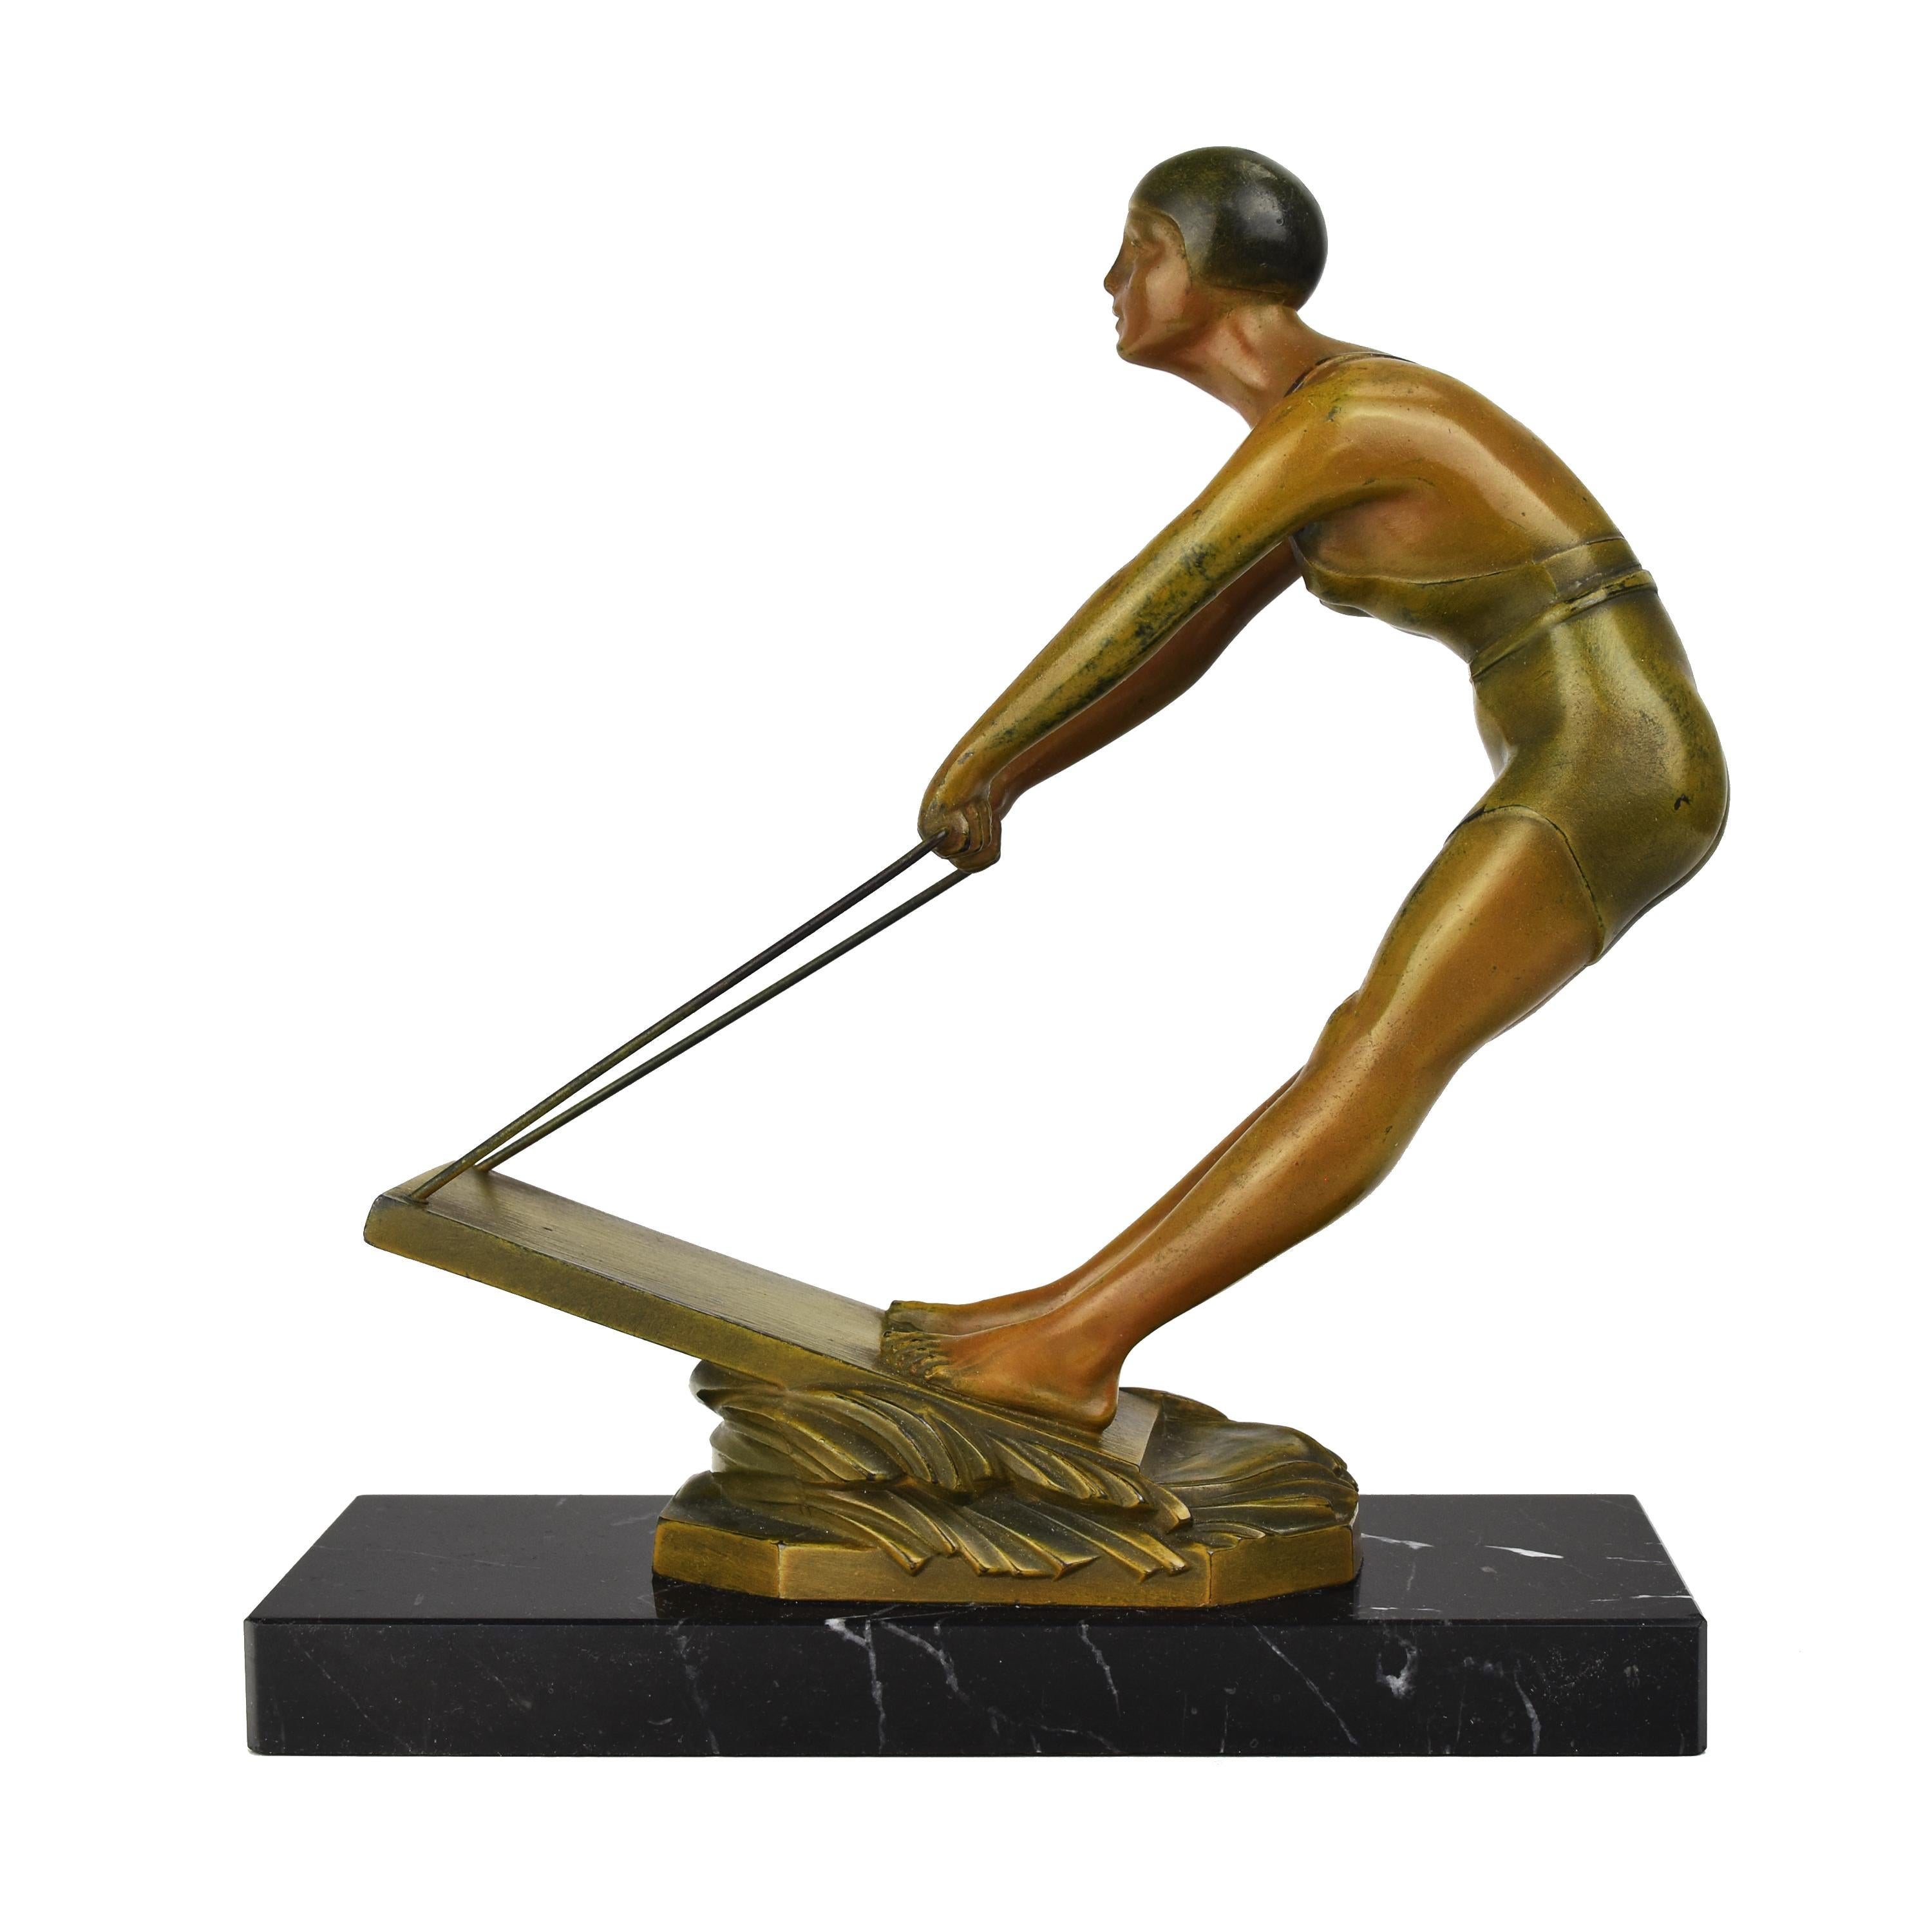 This sculpture depicts a female wakeboarder in a dynamic pose, holding strongly the handle attached to the wakeboard on the waves. The figure is dressed in a tight-fitting swimsuit with and she's wearing a swimming cap. The sculpture was crafted in